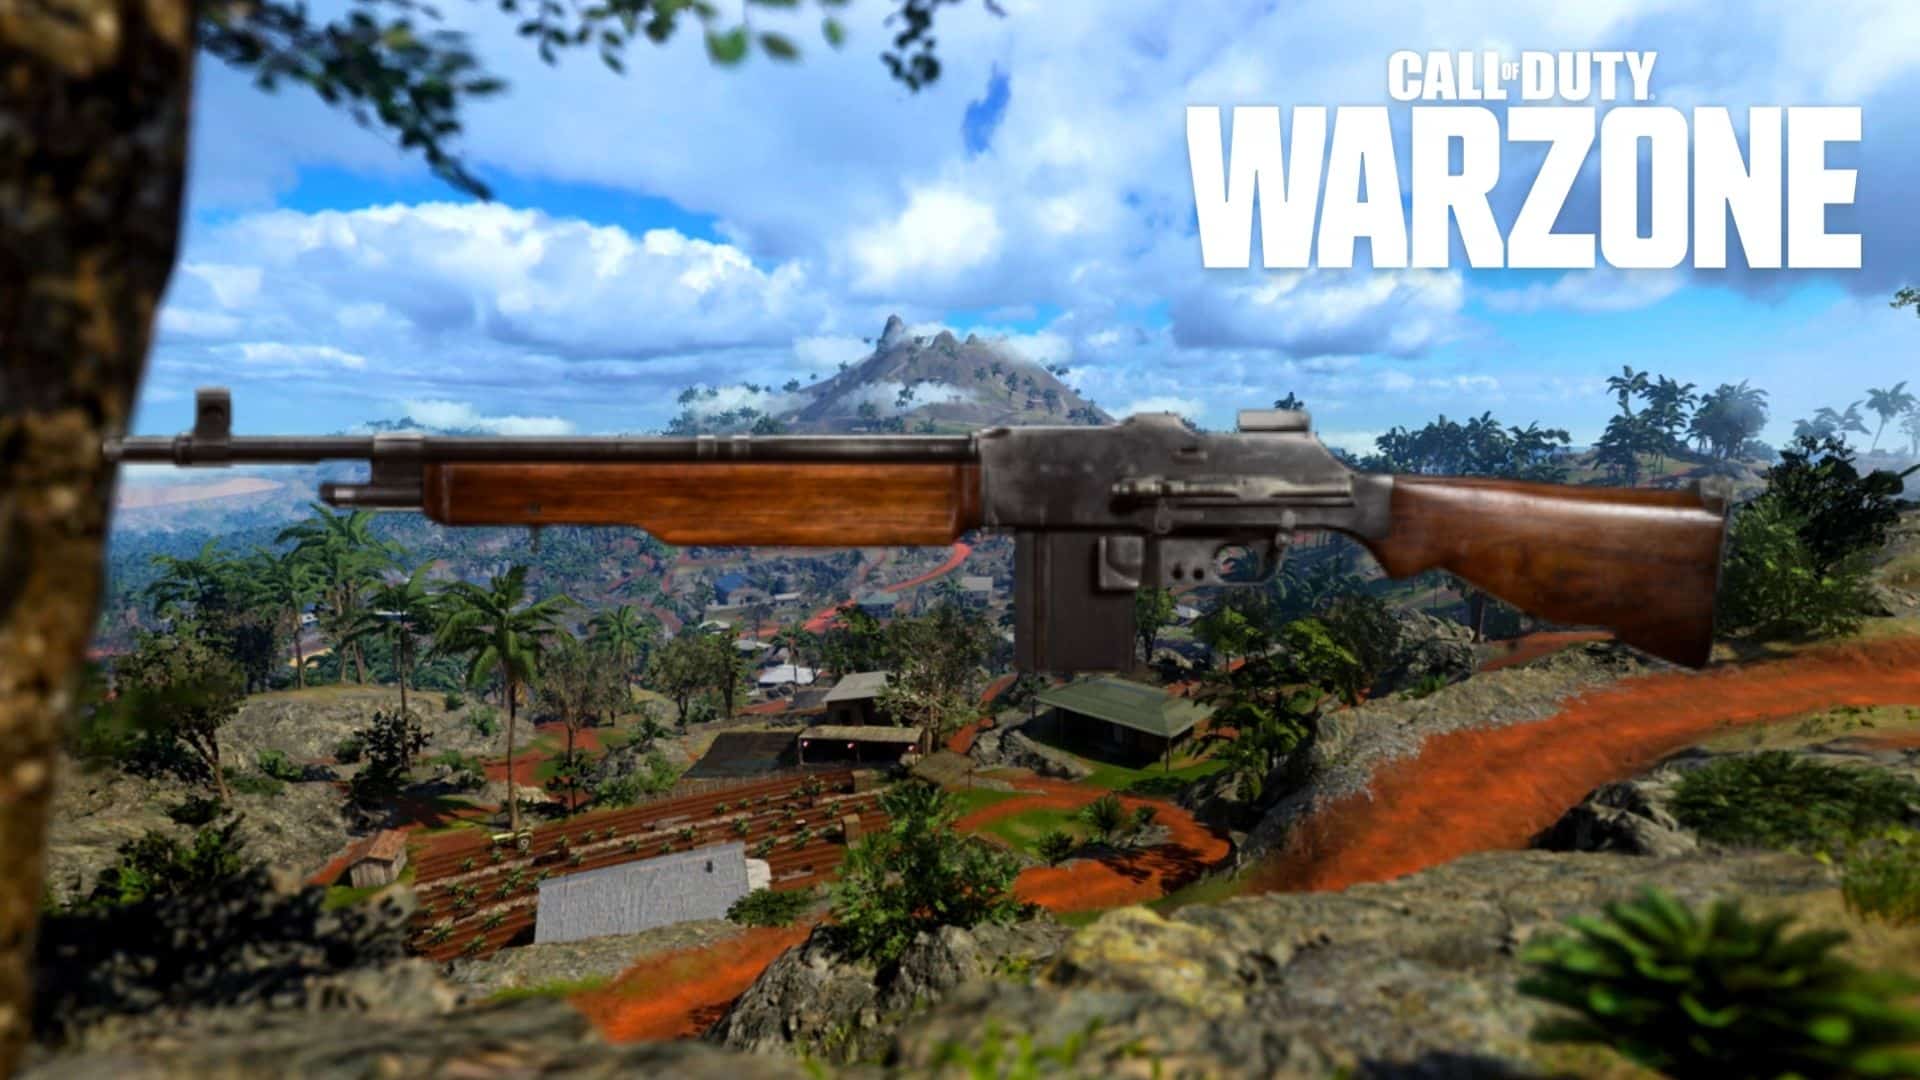 BAR assault rifle on top of Caldera landscape in Warzone